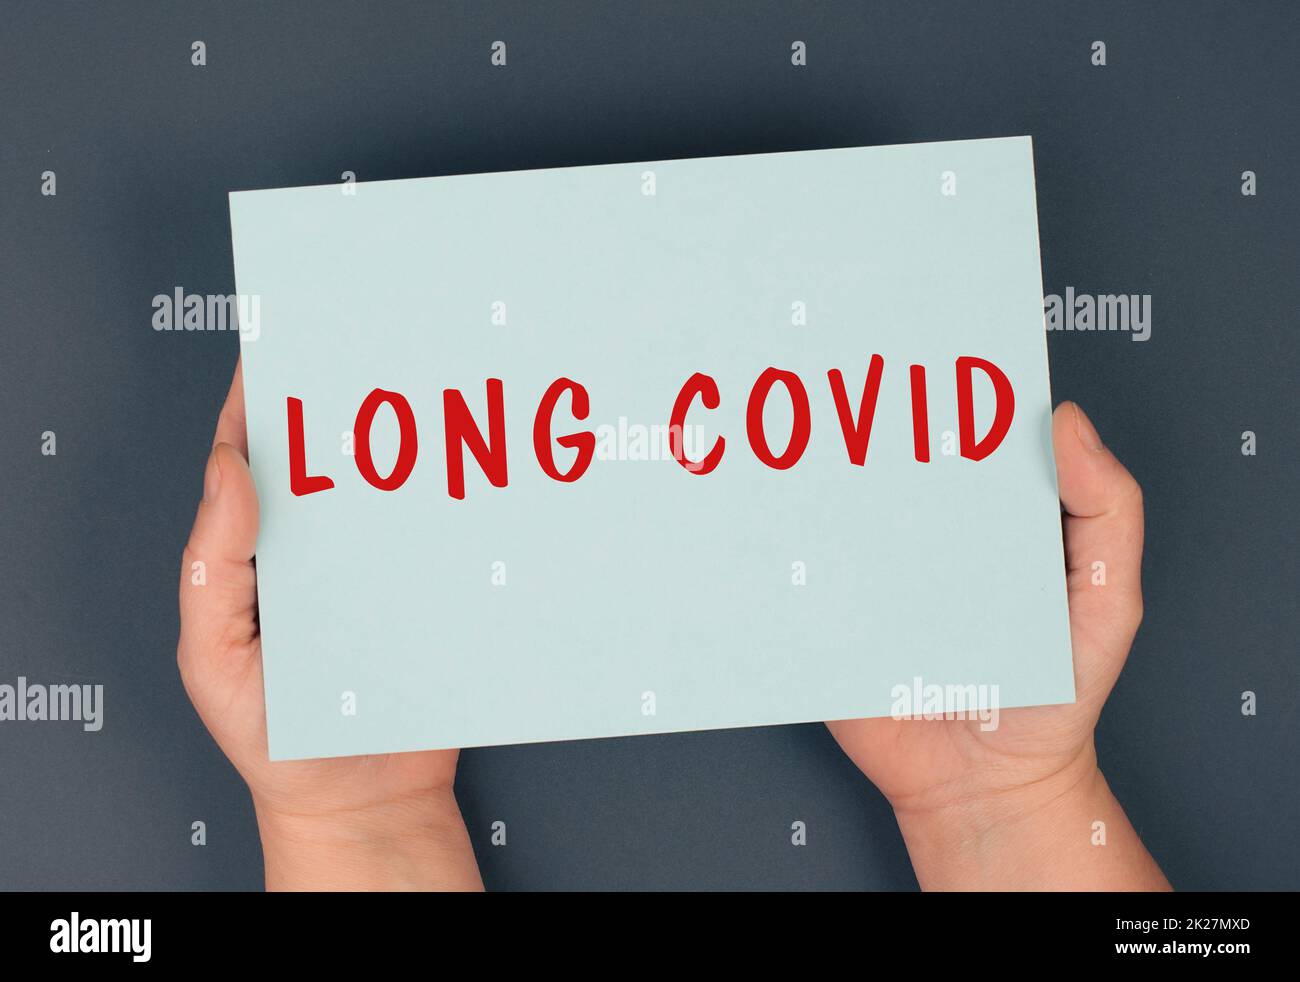 The words long covid are standing on a paper, hands hold the message, problems after covid-19 disease Stock Photo